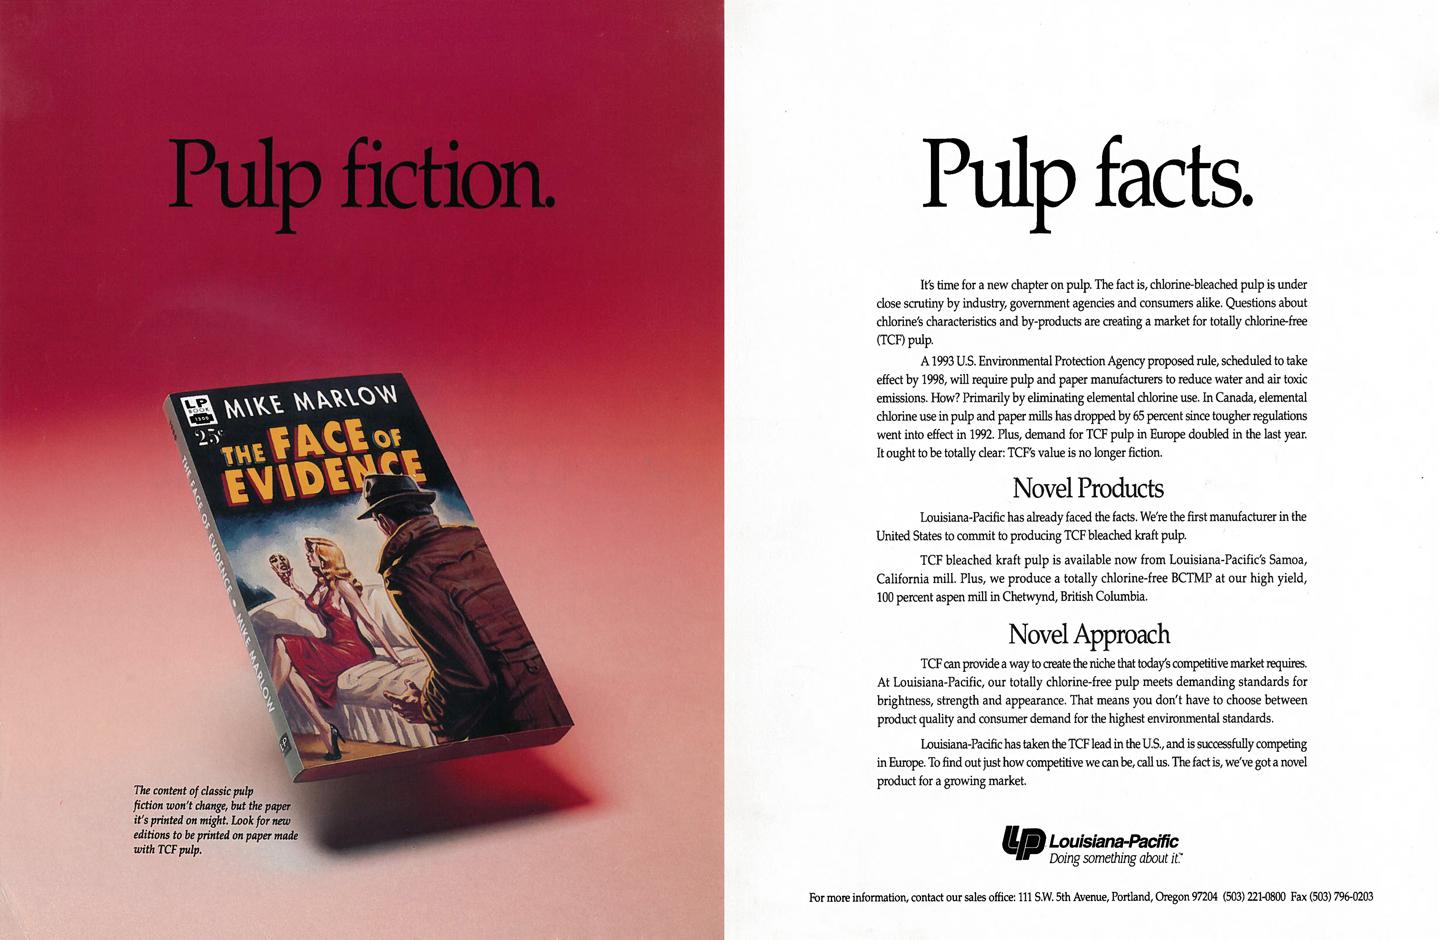 Pulp Fiction advertising ad